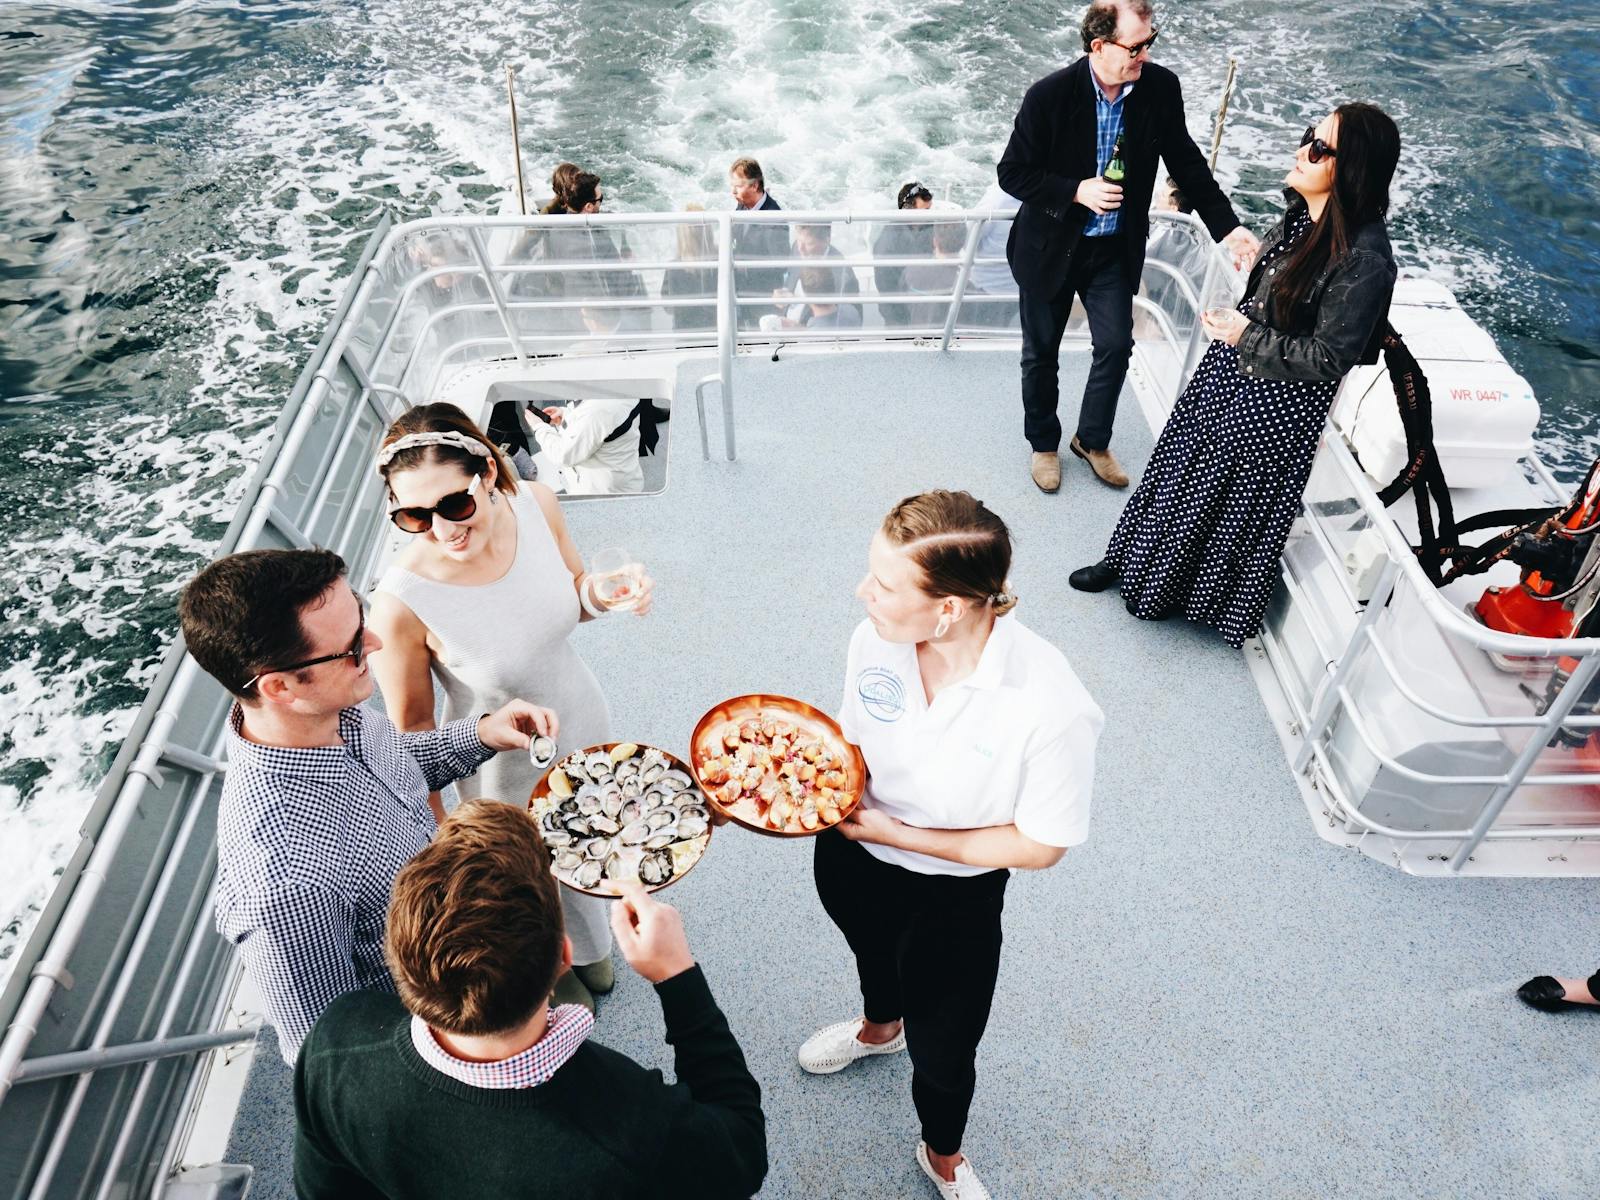 3 people being served canapes by staff on outside deck of vessel.